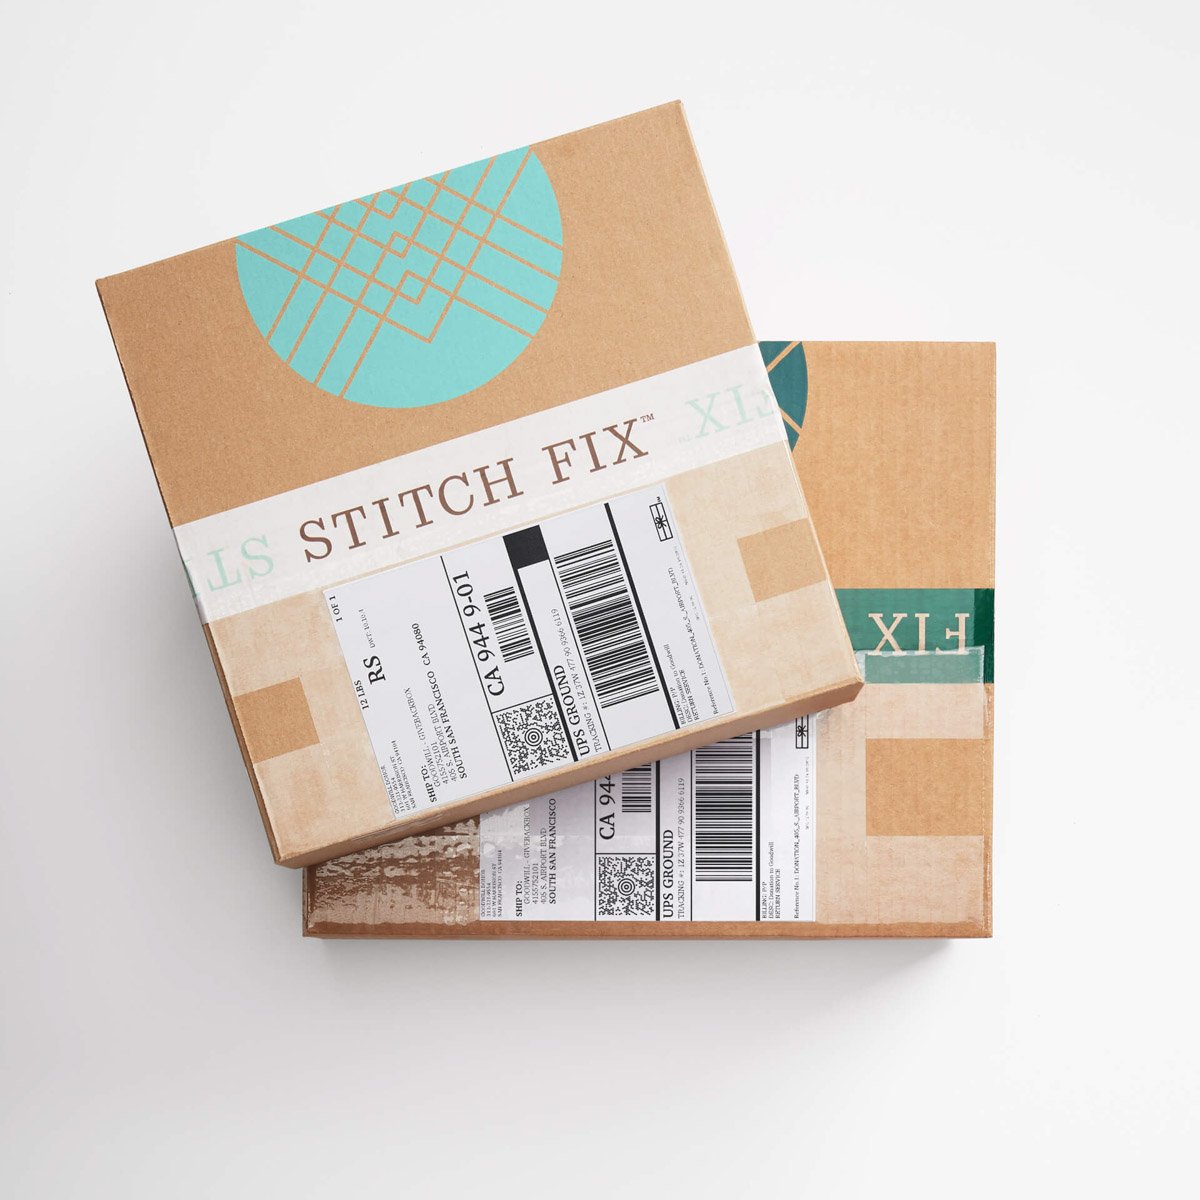 two Stitch Fix boxes stacked on top of each other